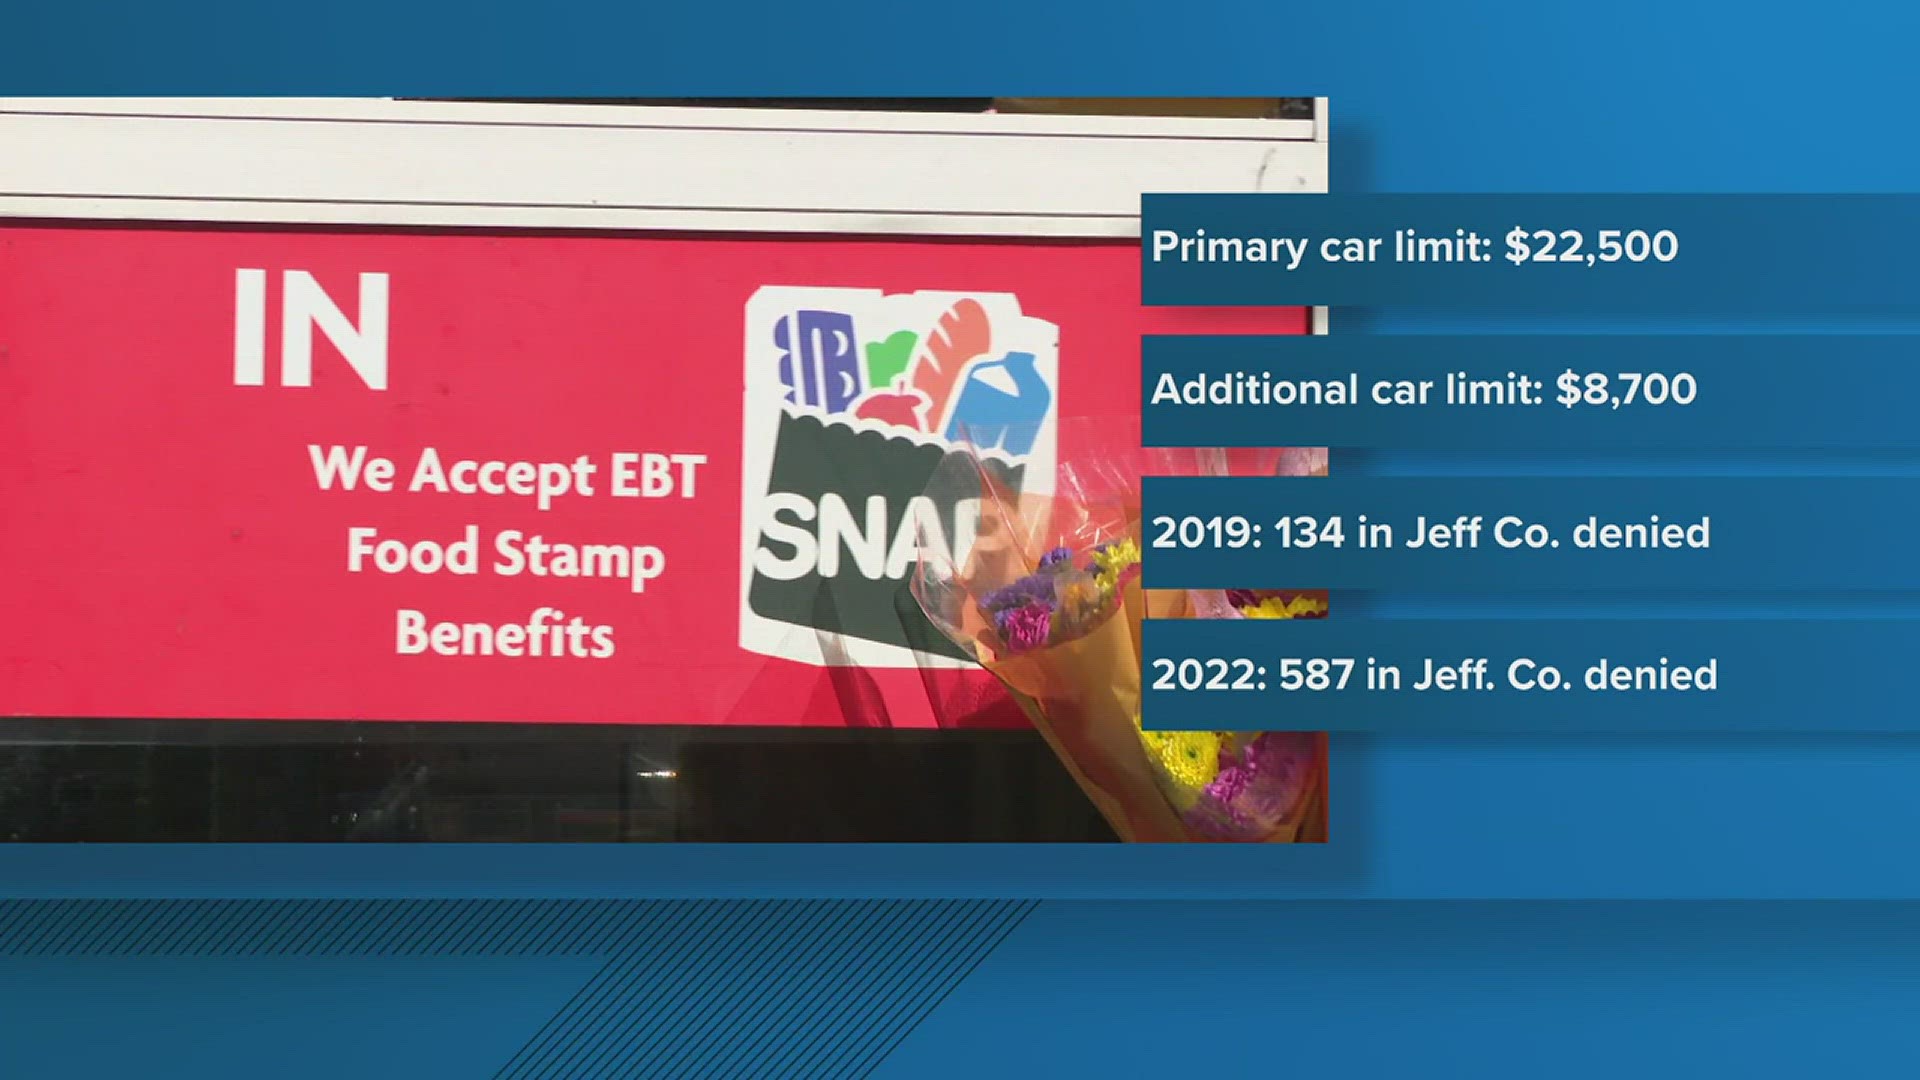 The Texas Legislature recently passed House Bill 1287, which increases the limits to $22,500 for the household's primary car and $8,700 for any additional cars.